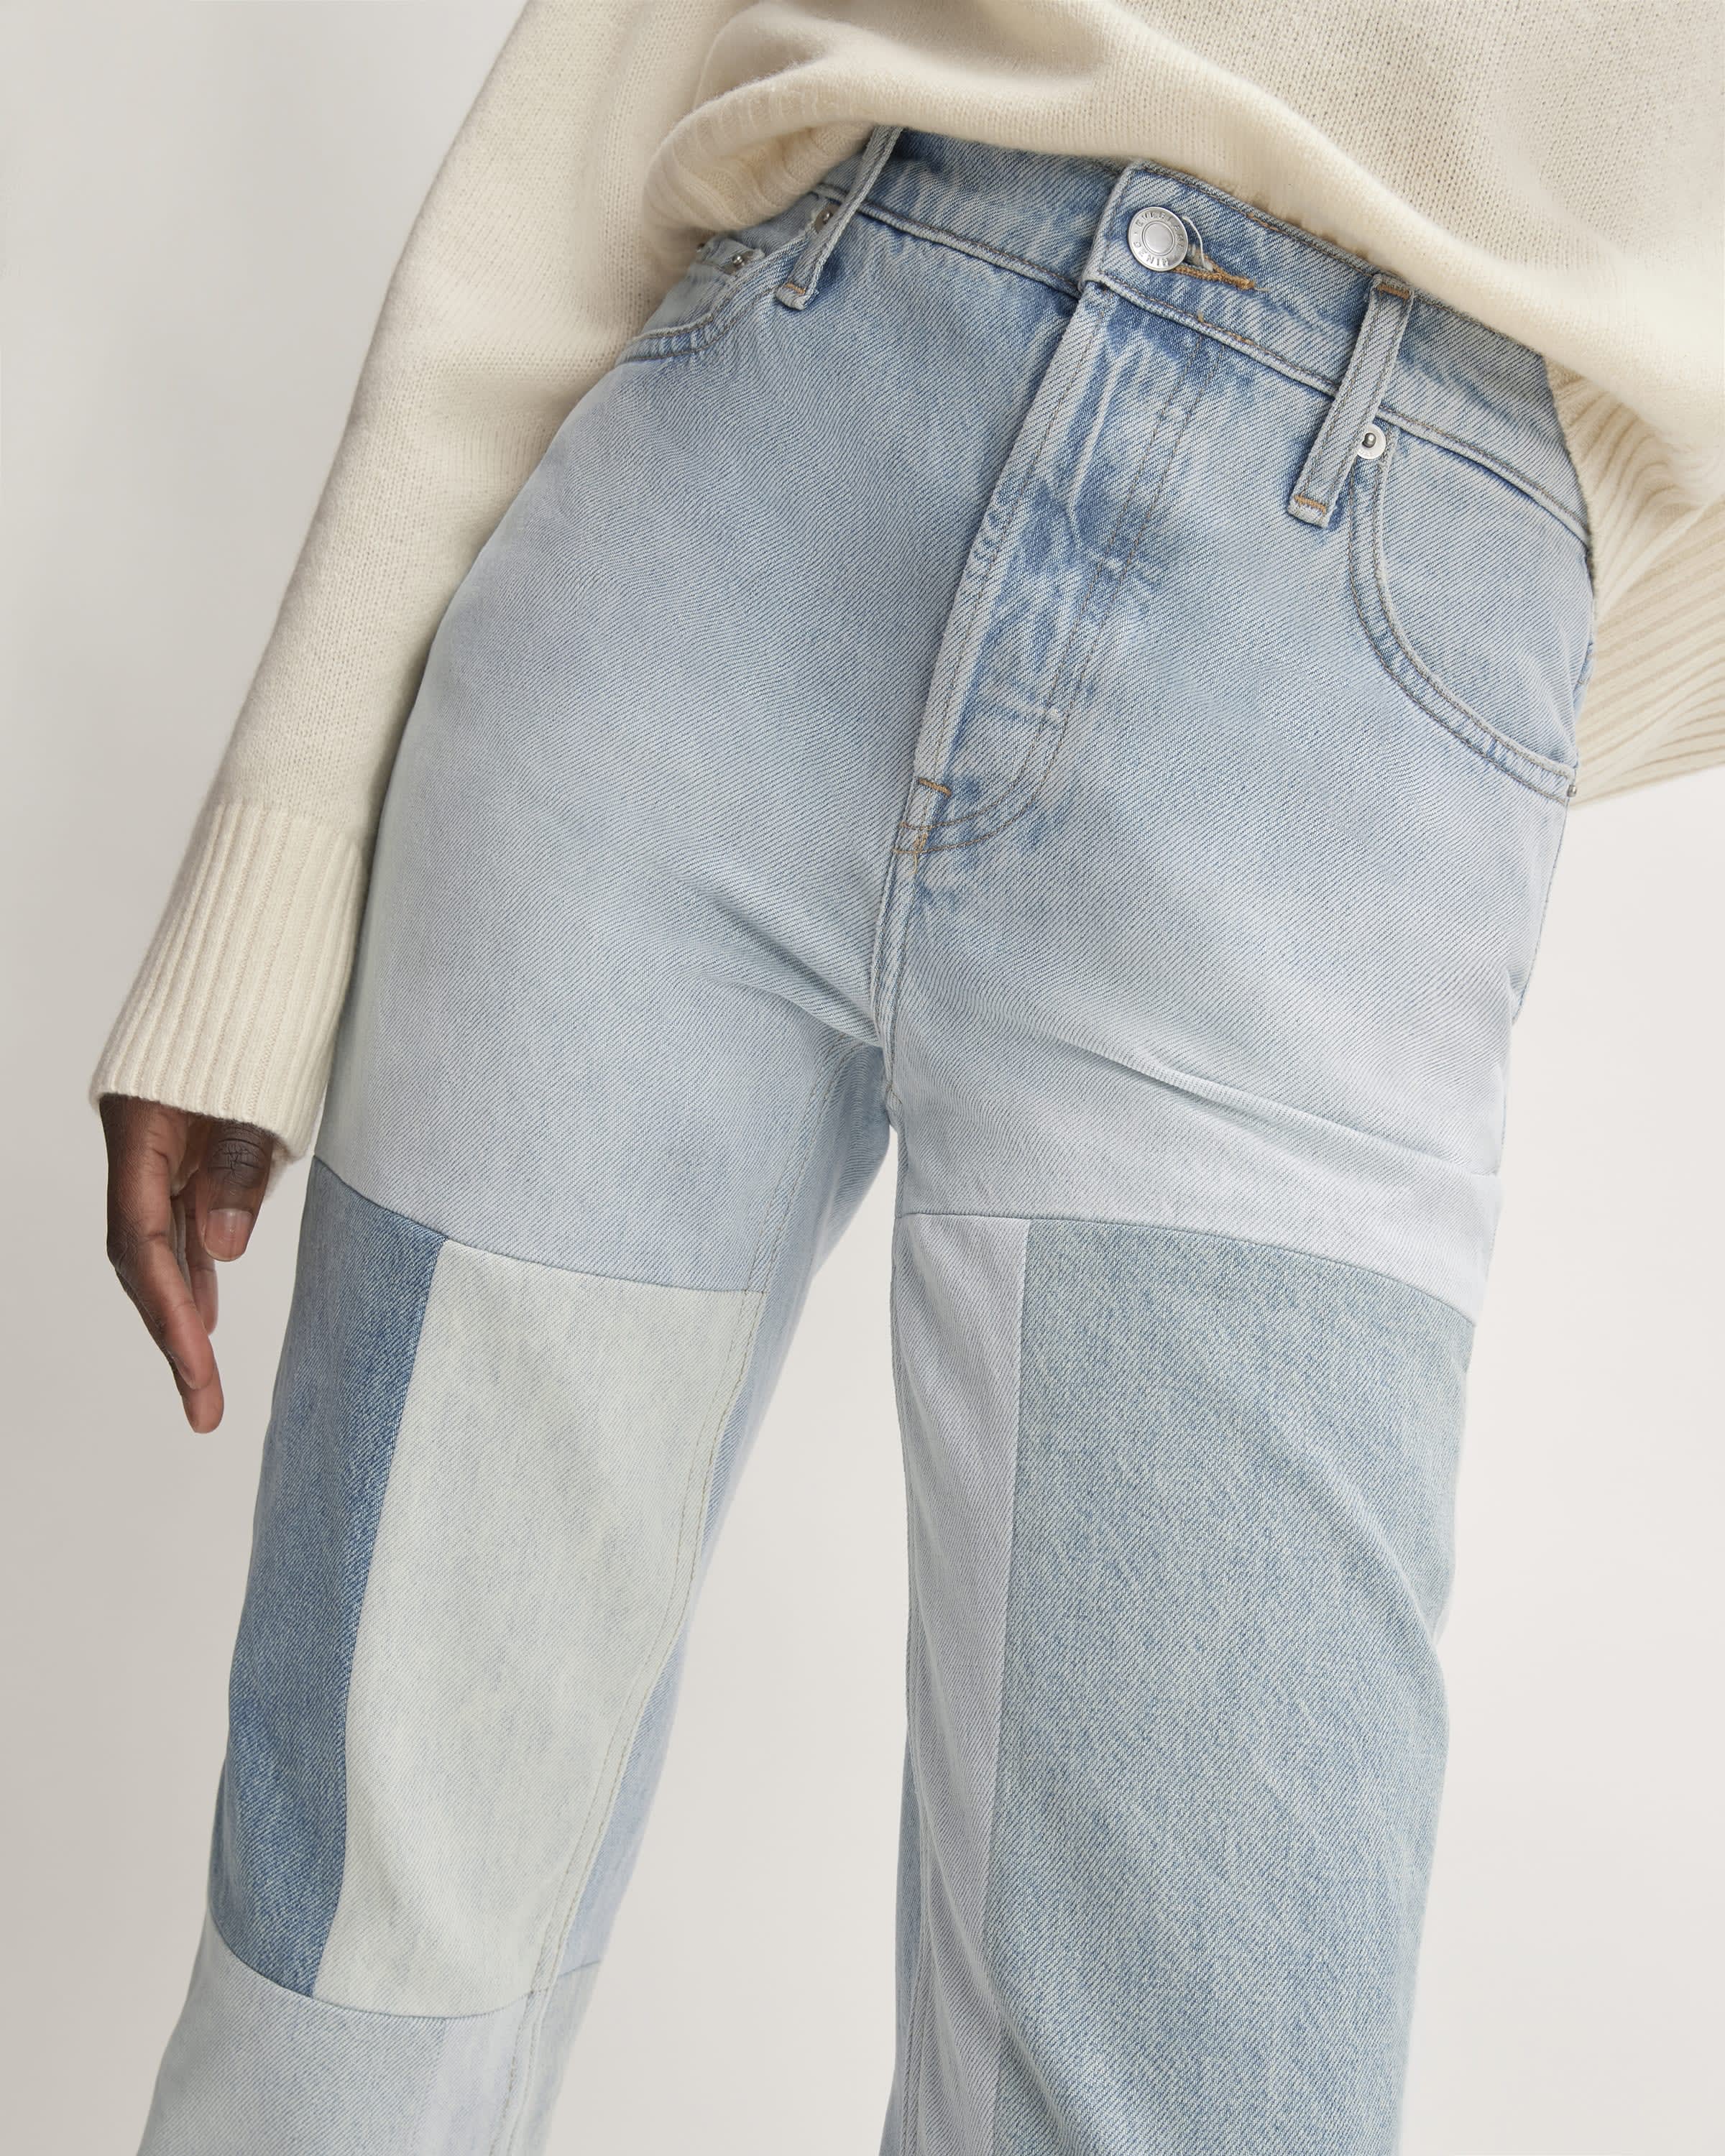 The ’90s Cheeky® Mended Jean Patched Indigo – Everlane